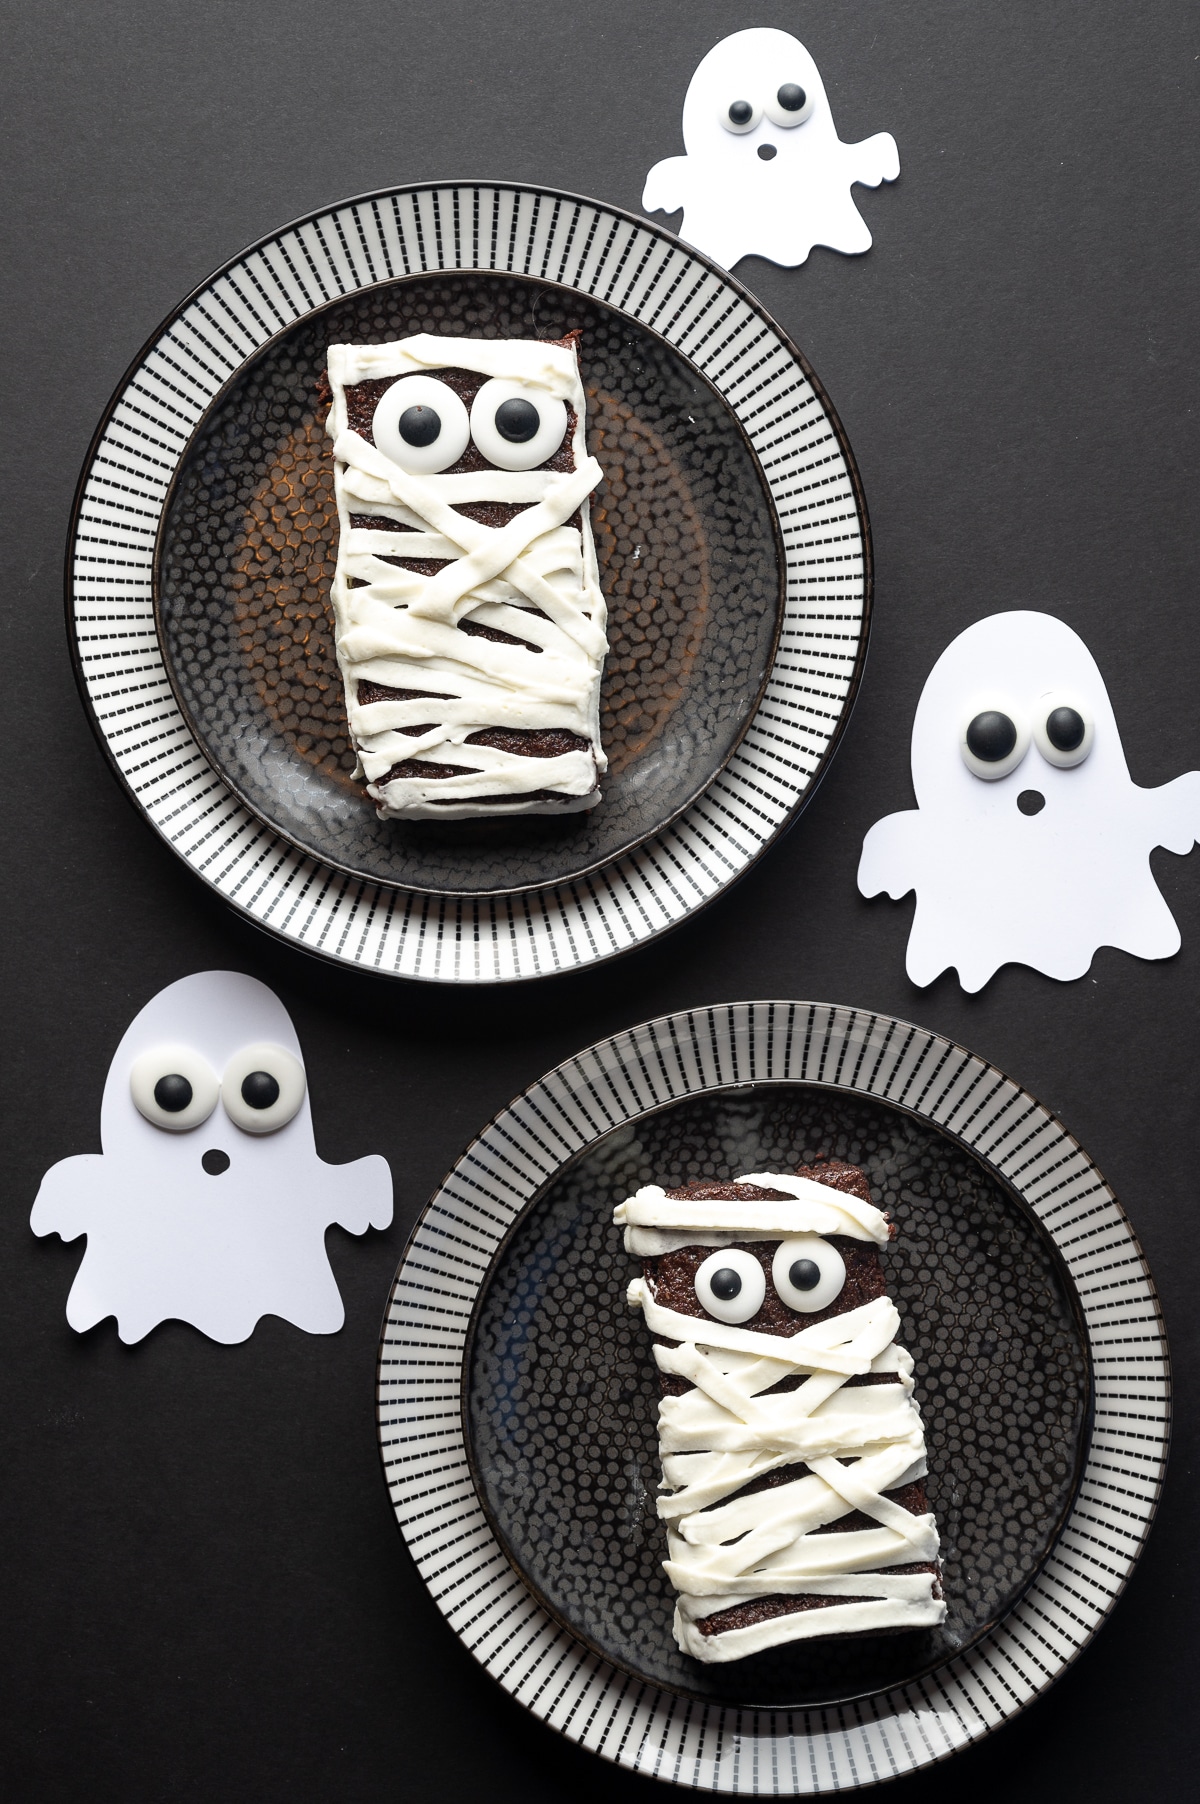 Sugar free brownie with googly eyes and frosting applied in strips to look like bandages on a black background